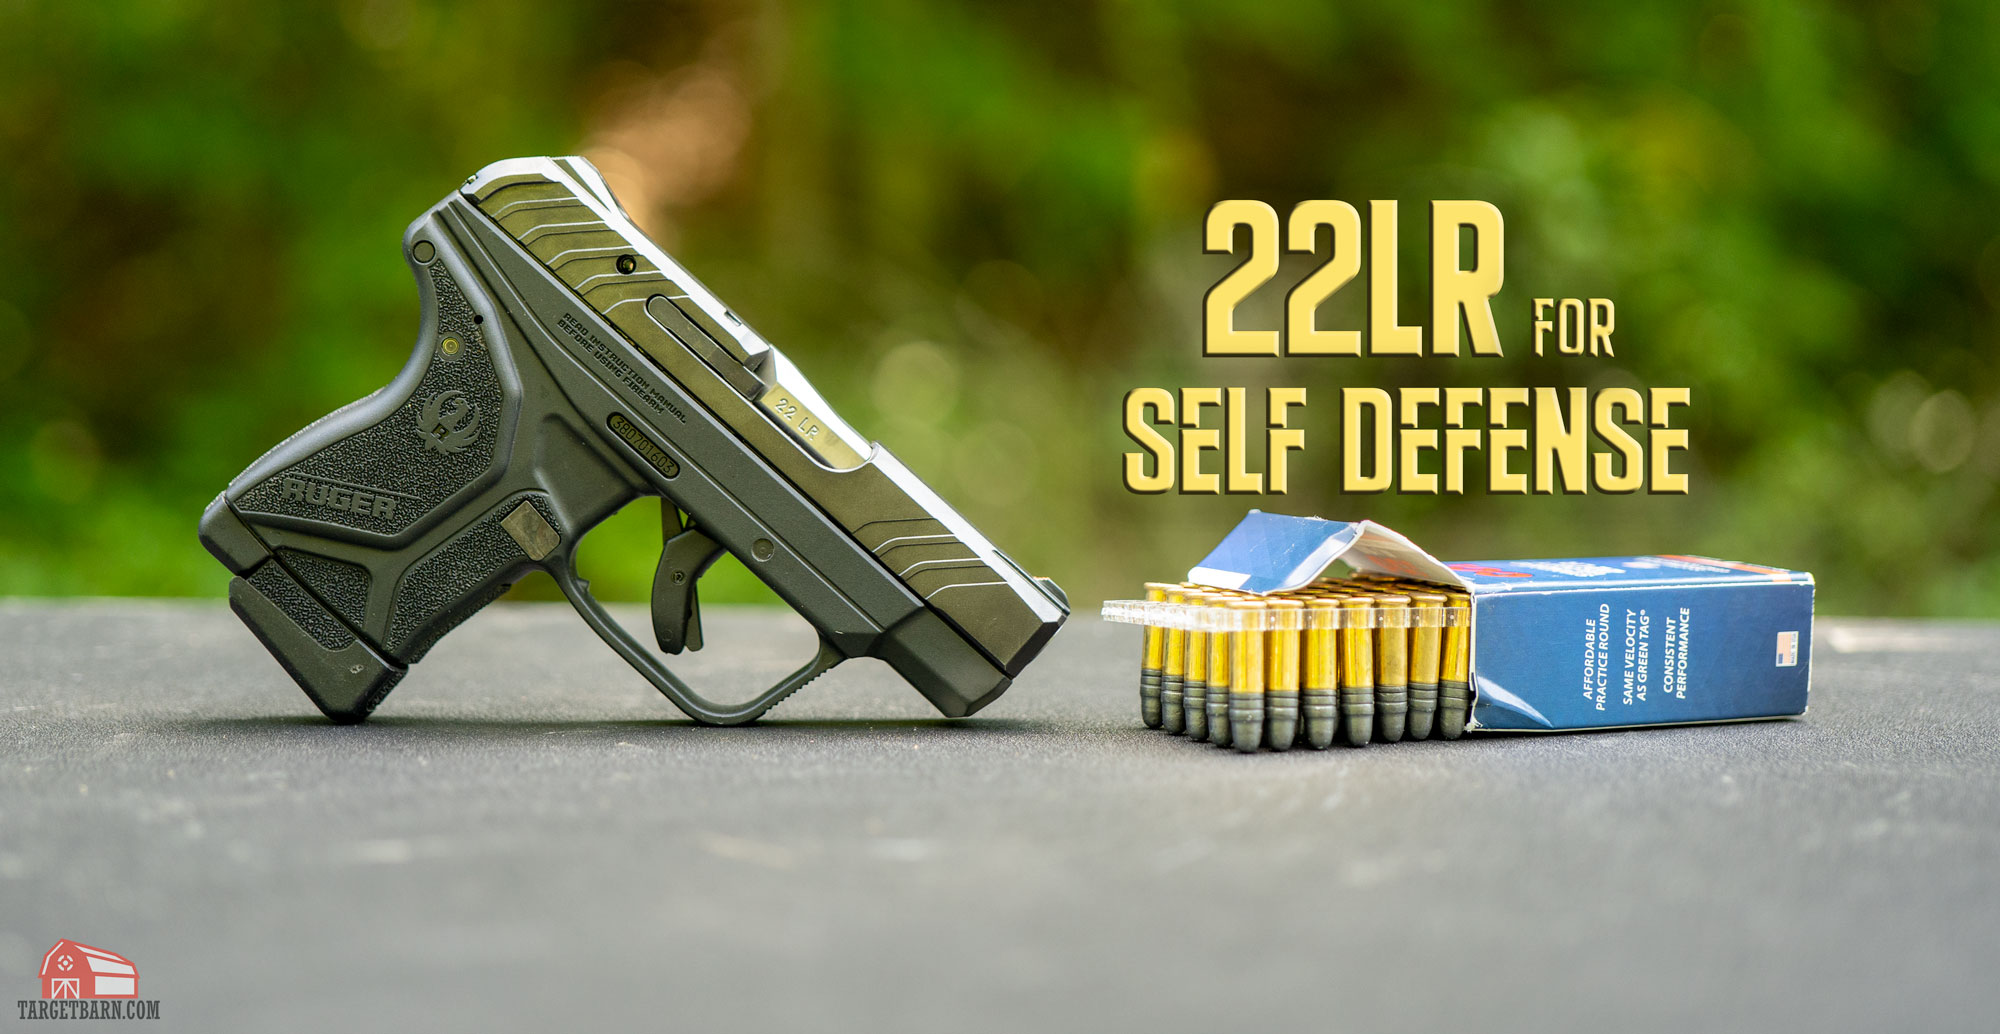 22LR for Self Defense: Why It's A Bad Idea - The Broad Side